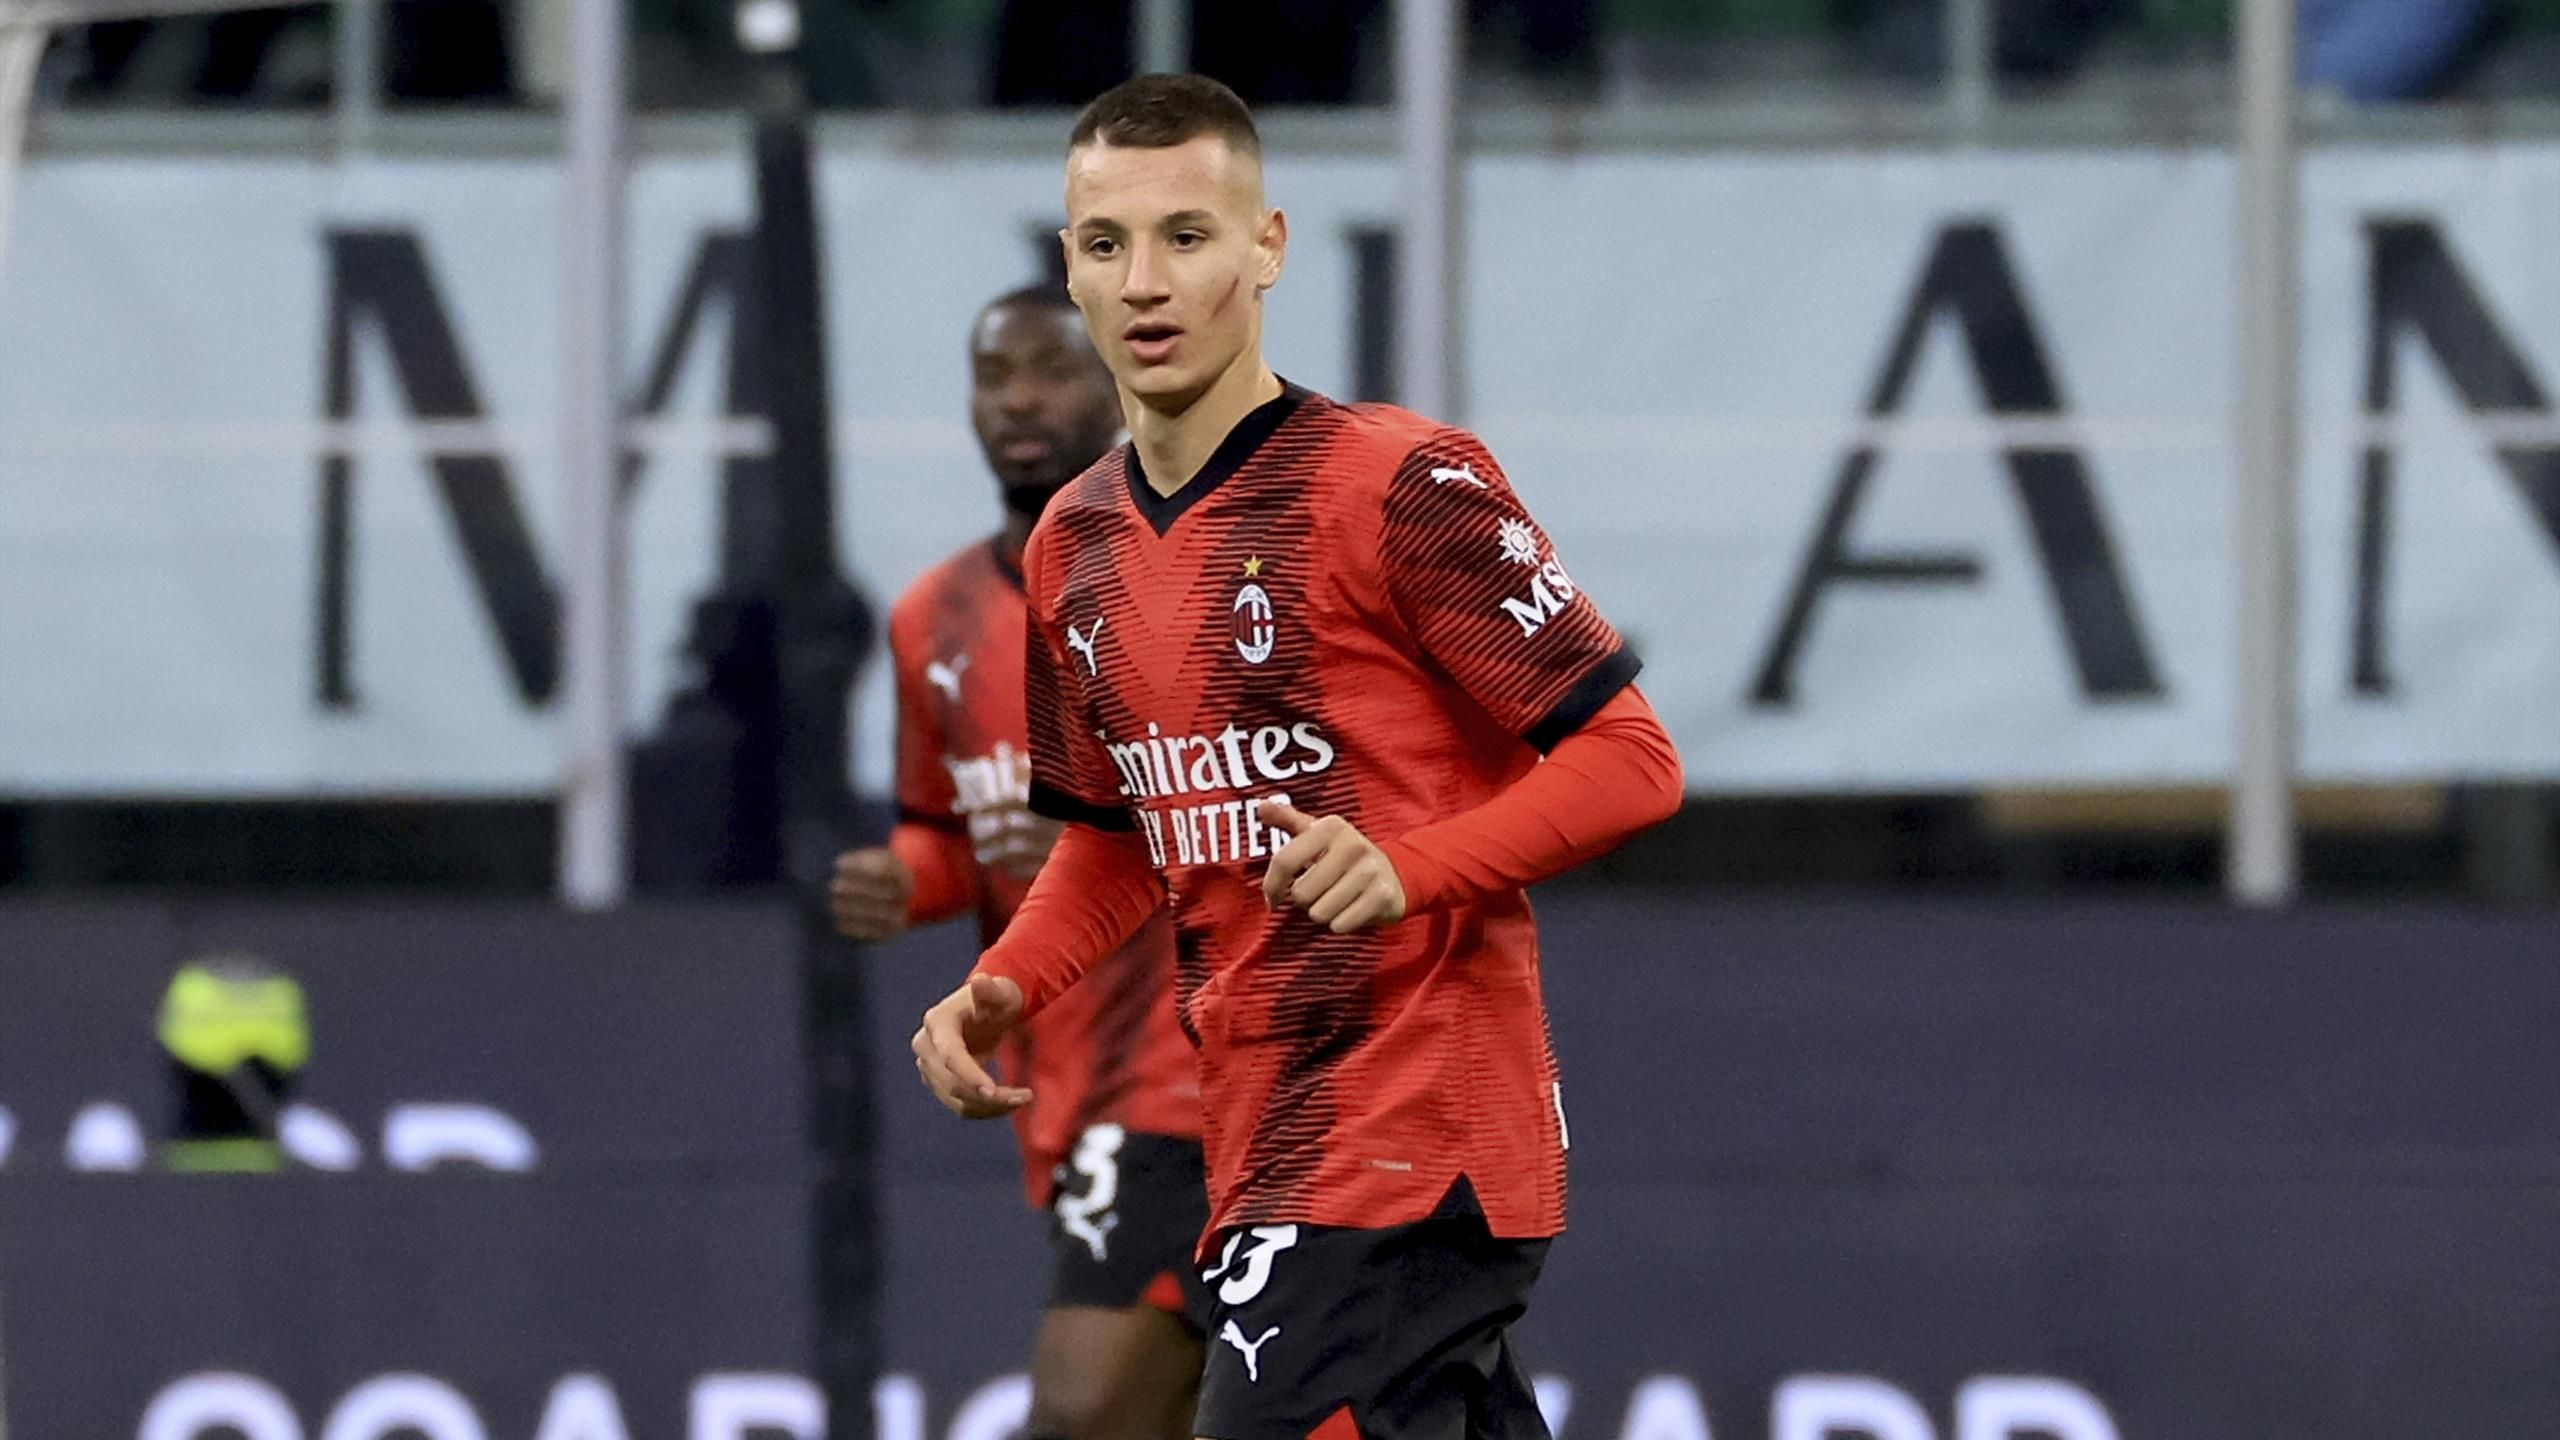 Milan – Fiorentina, Francesco Camarda becomes the youngest player ever to make his debut in the Italian League: Top 10 list